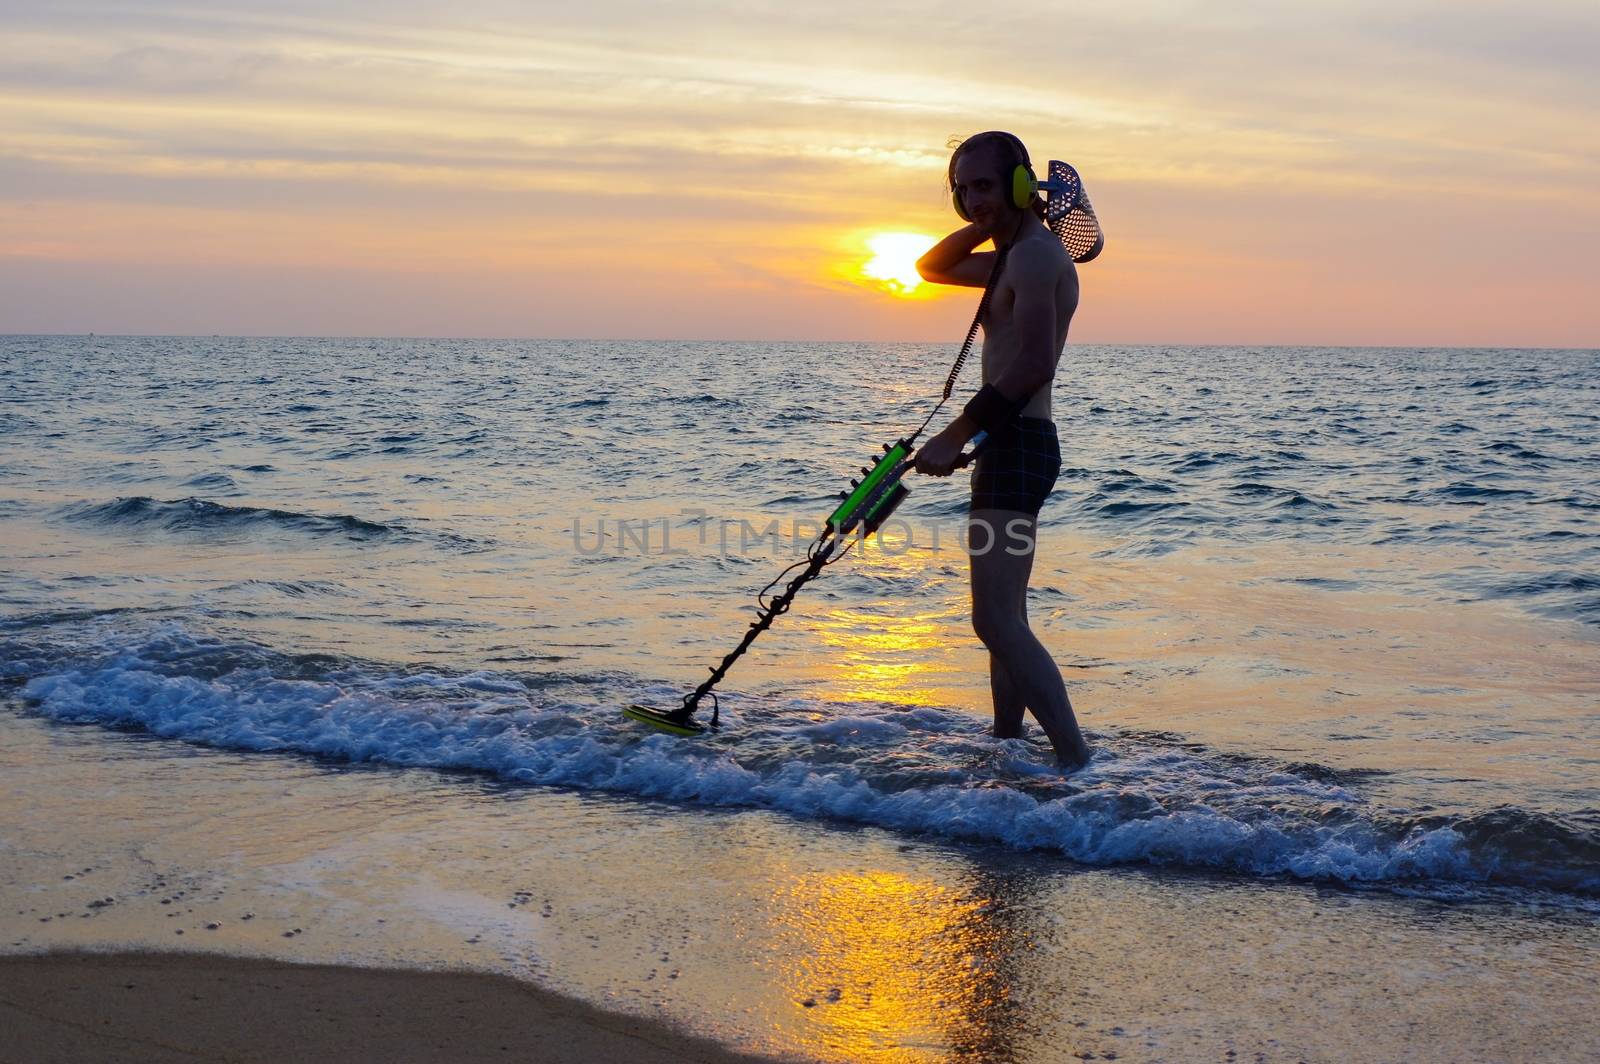 a treasure hunter with Metal detector on the beach